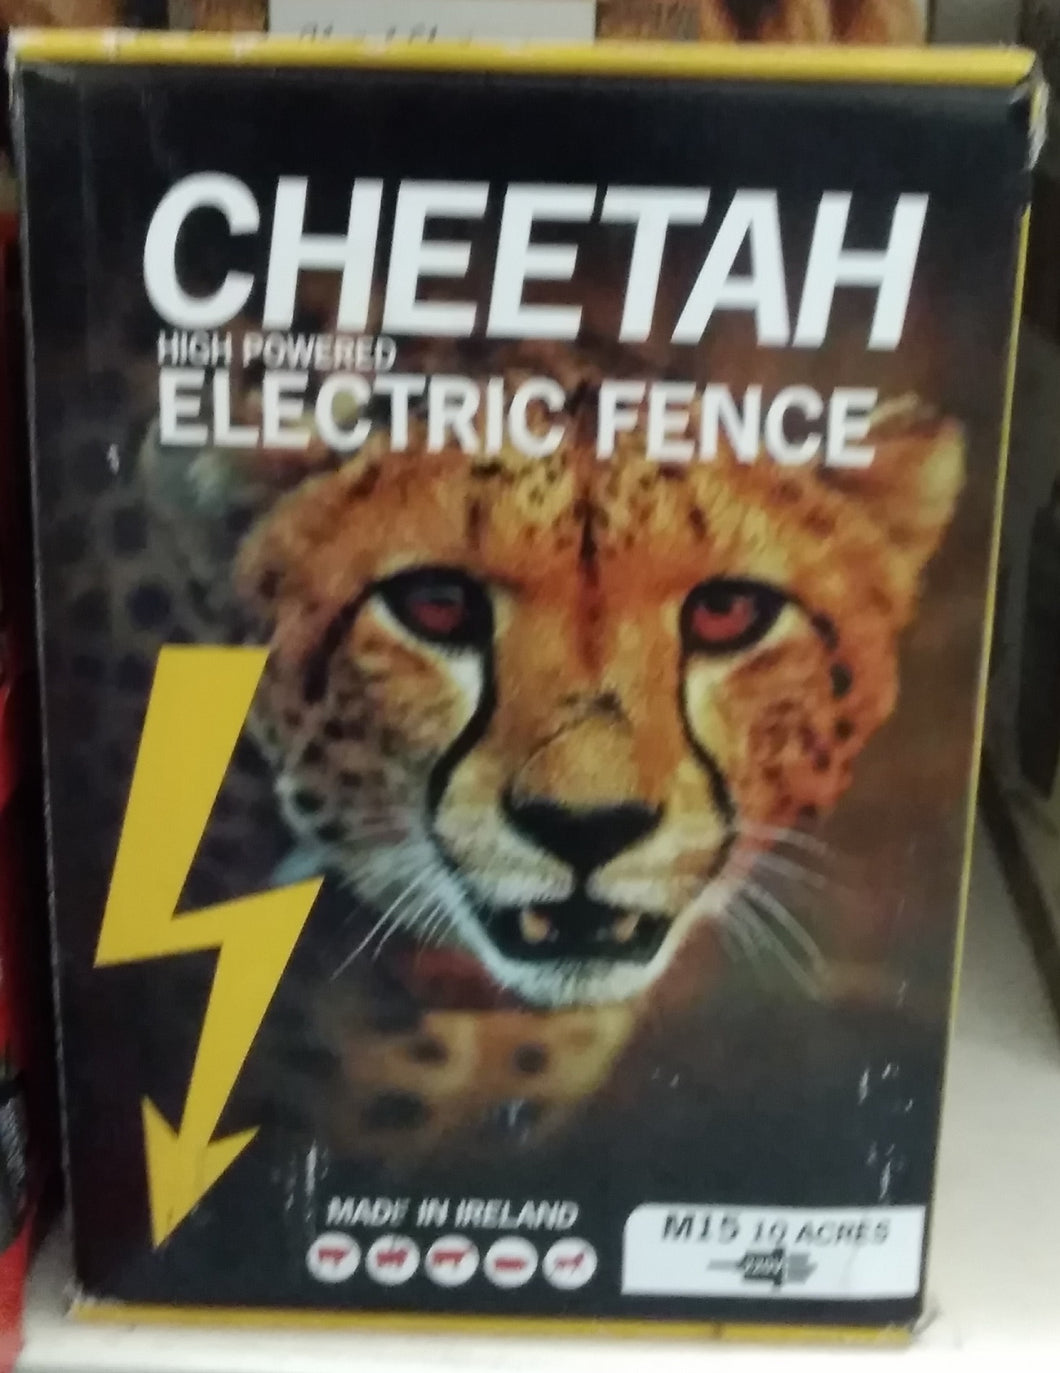 Cheetah High Powered Electric Fence - M15 10 Acres